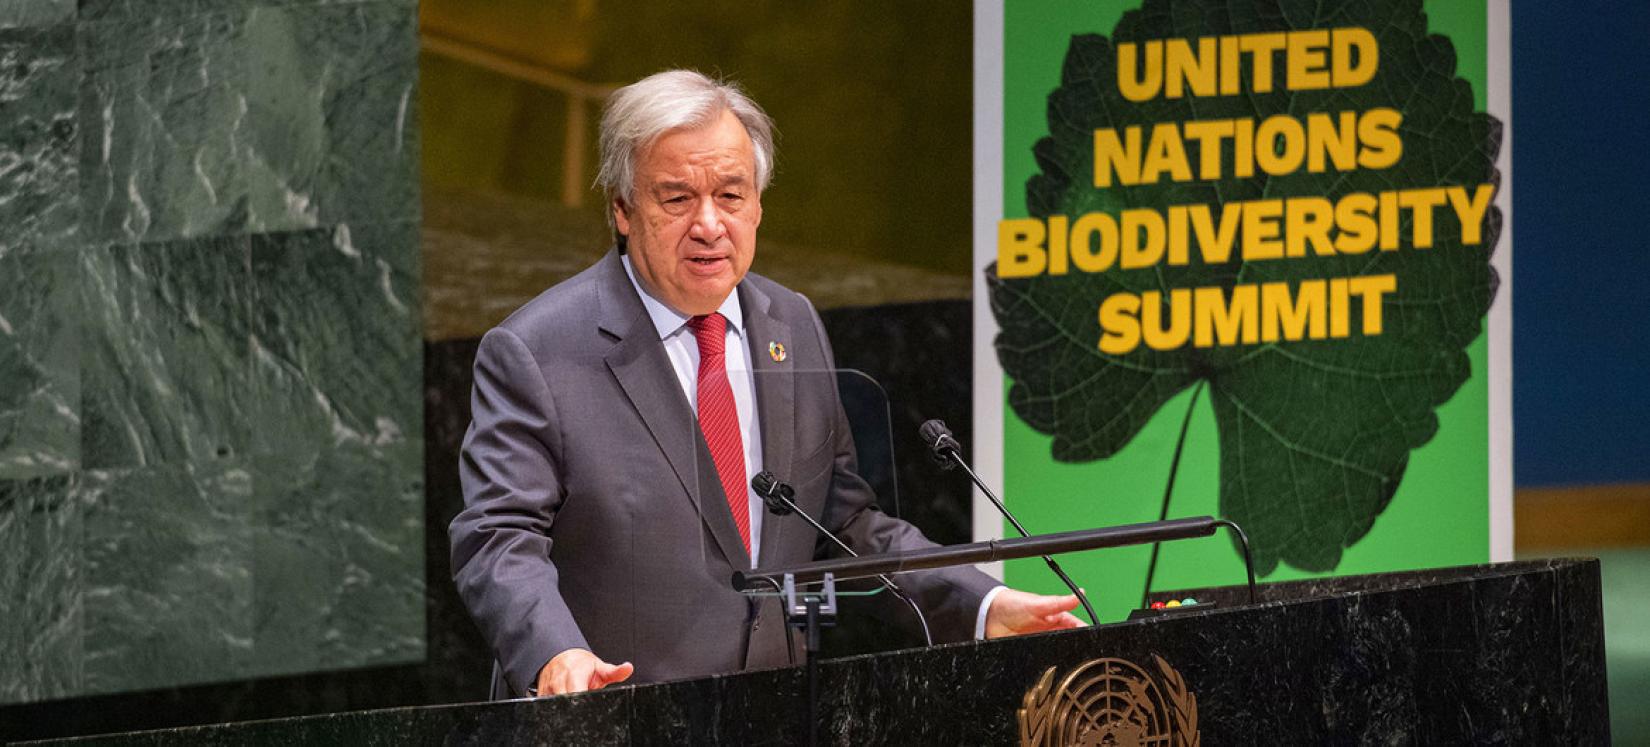 Statement by the UN Secretary-General at the Biodiversity Summit.